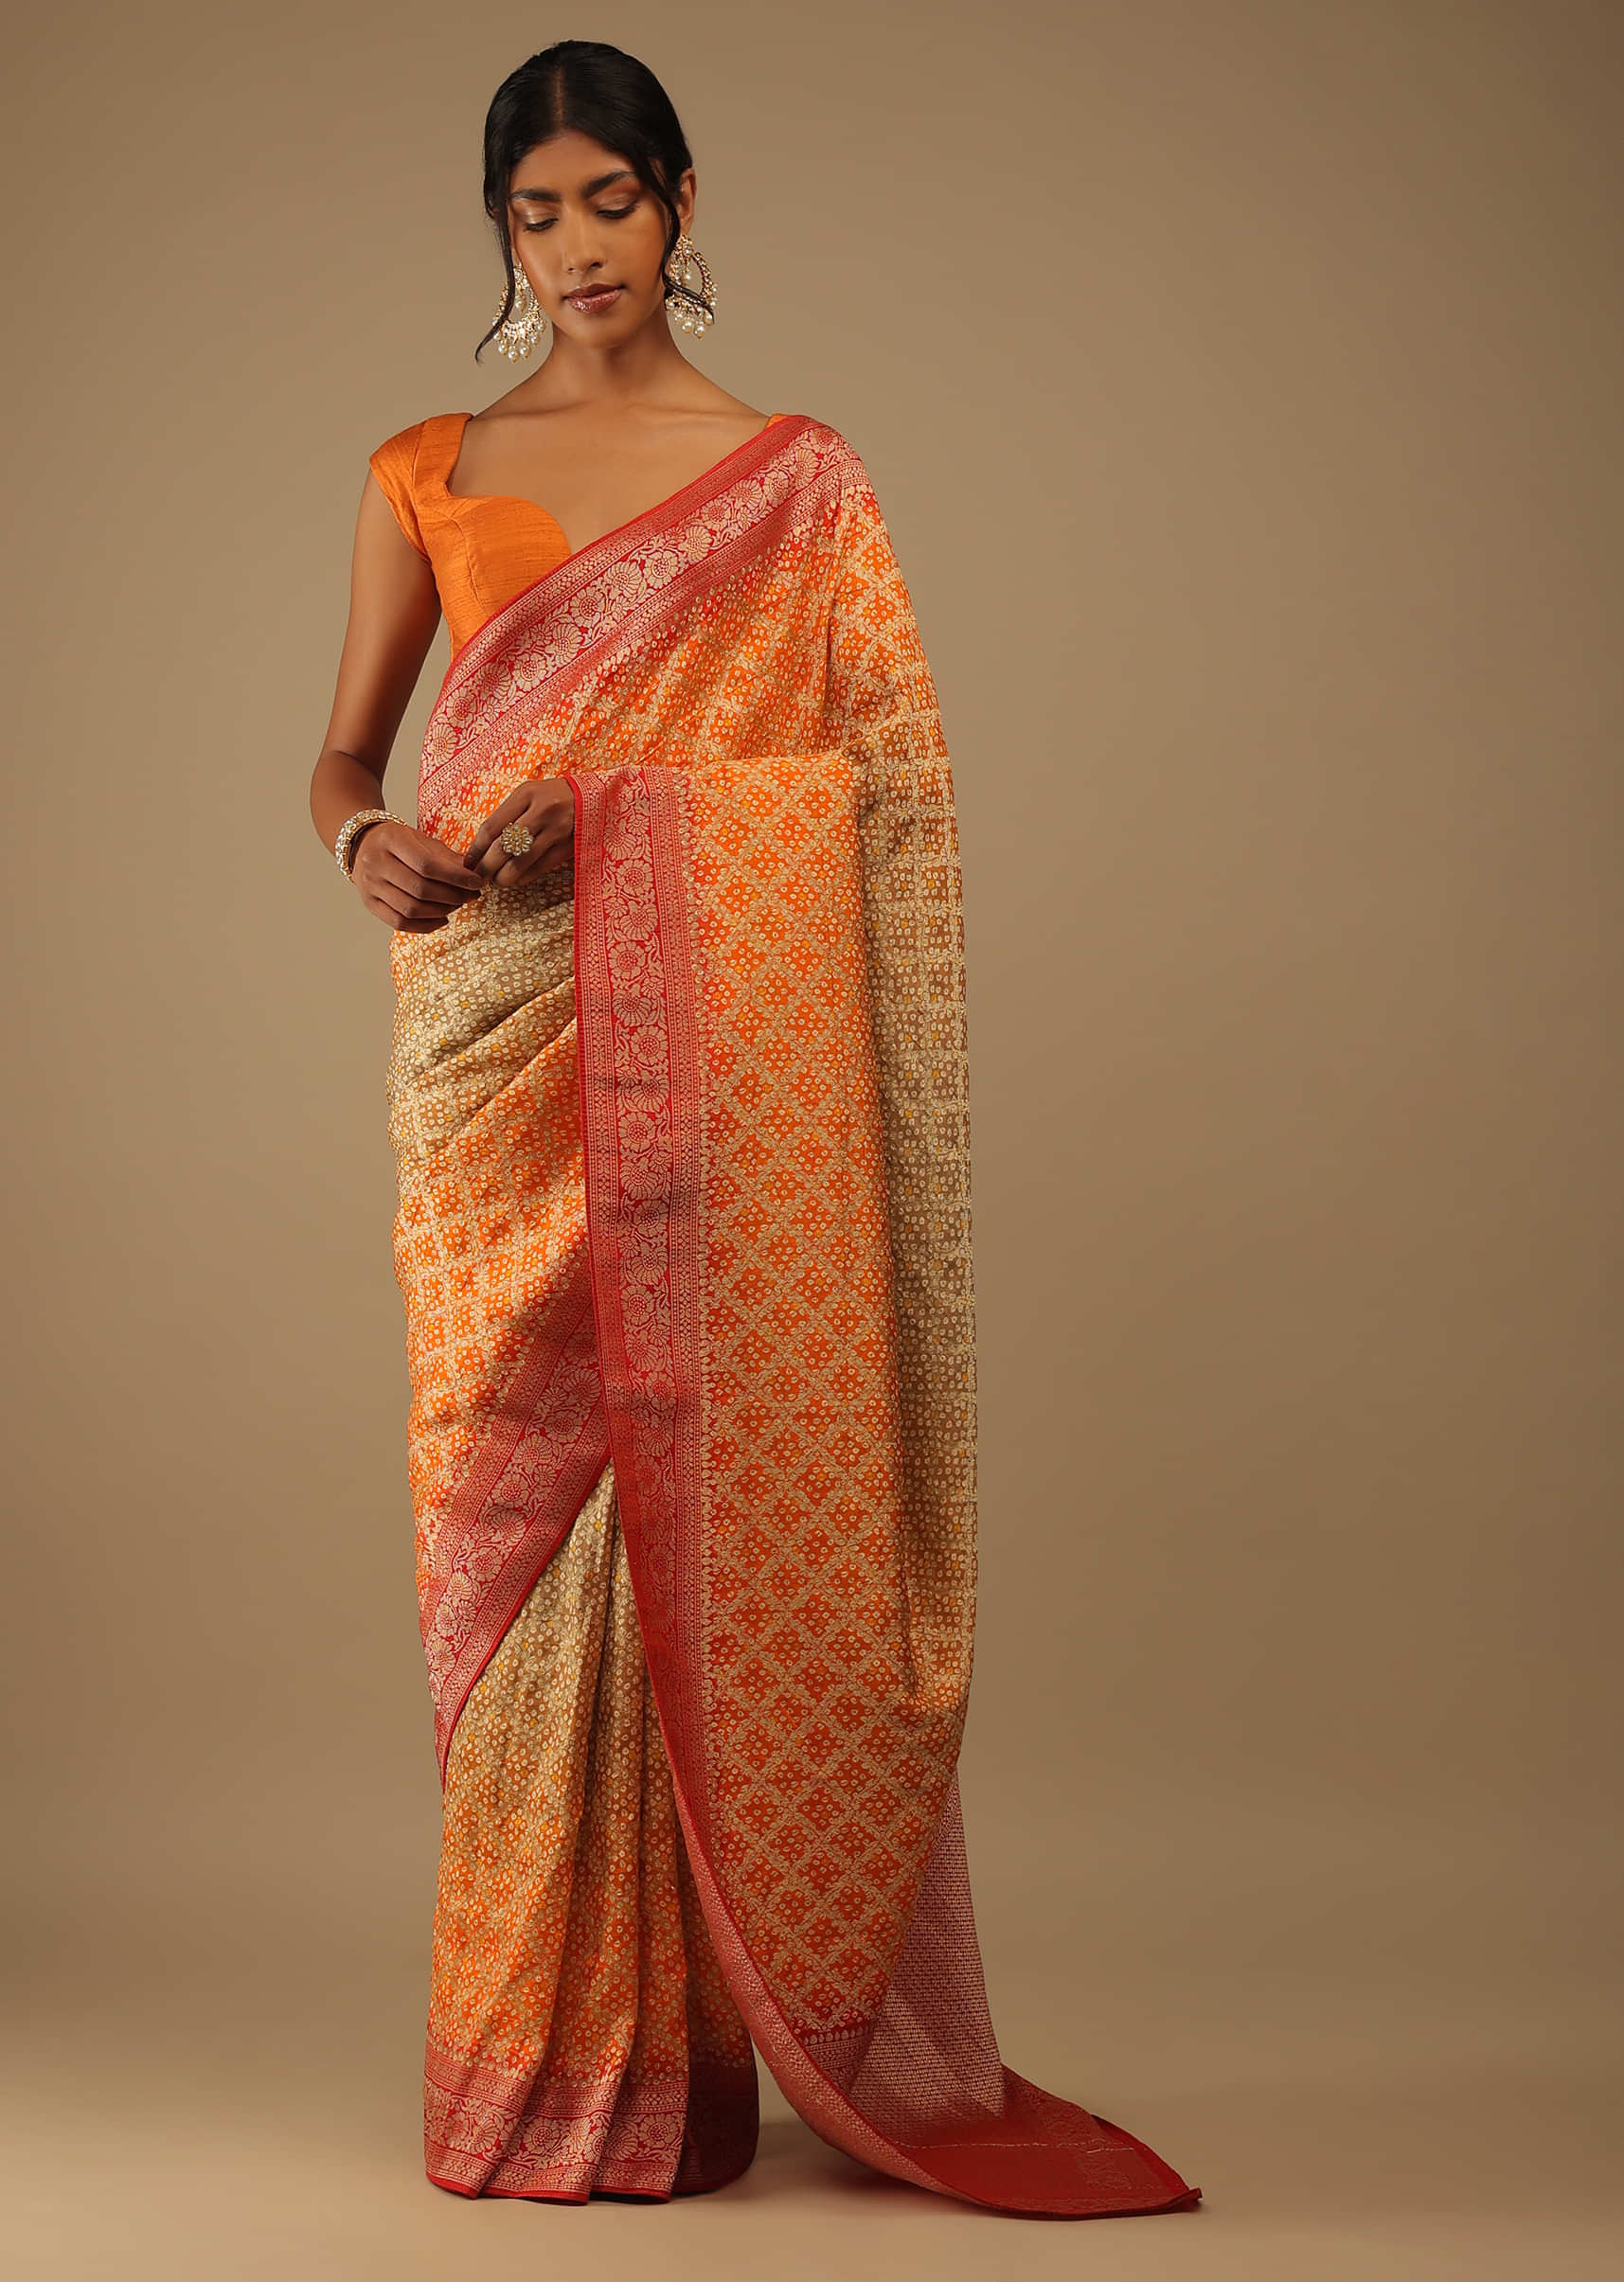 Orange And Cinnamon Color Saree In Bandhani Print, Crafted In Silk With Zari Embroidery